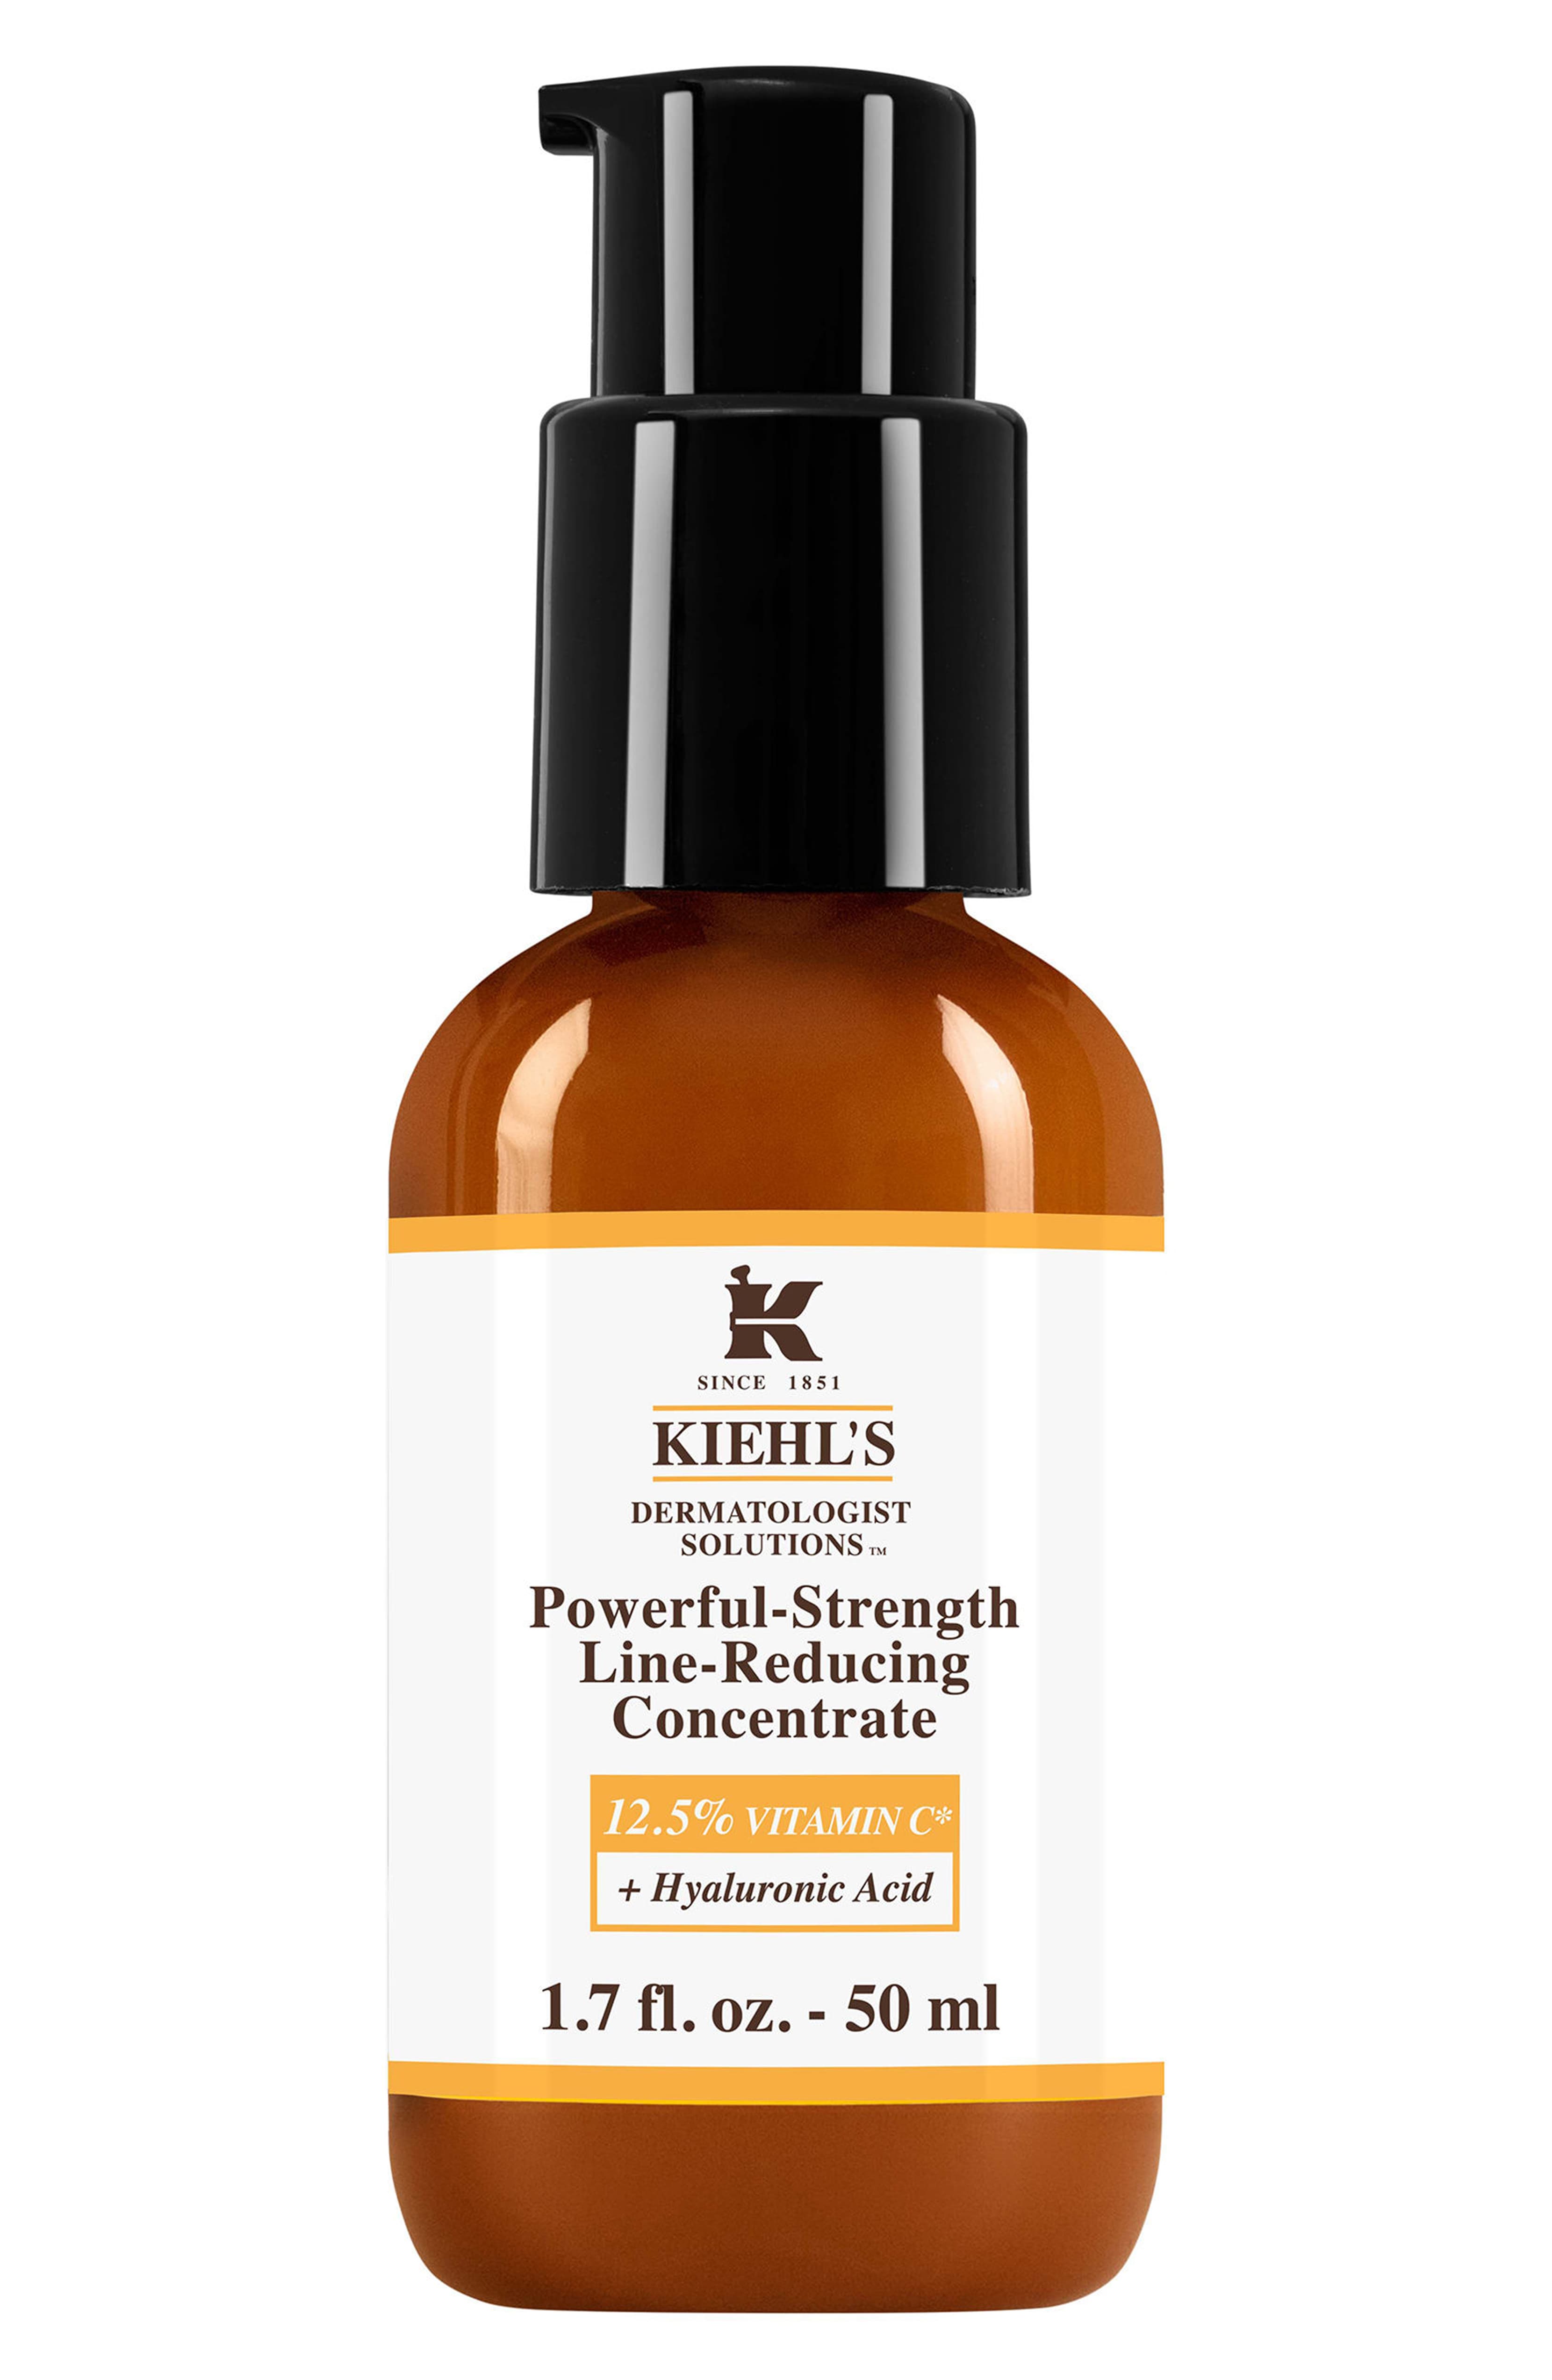 Powerful-Strength Line-Reducing Concentrate Serum